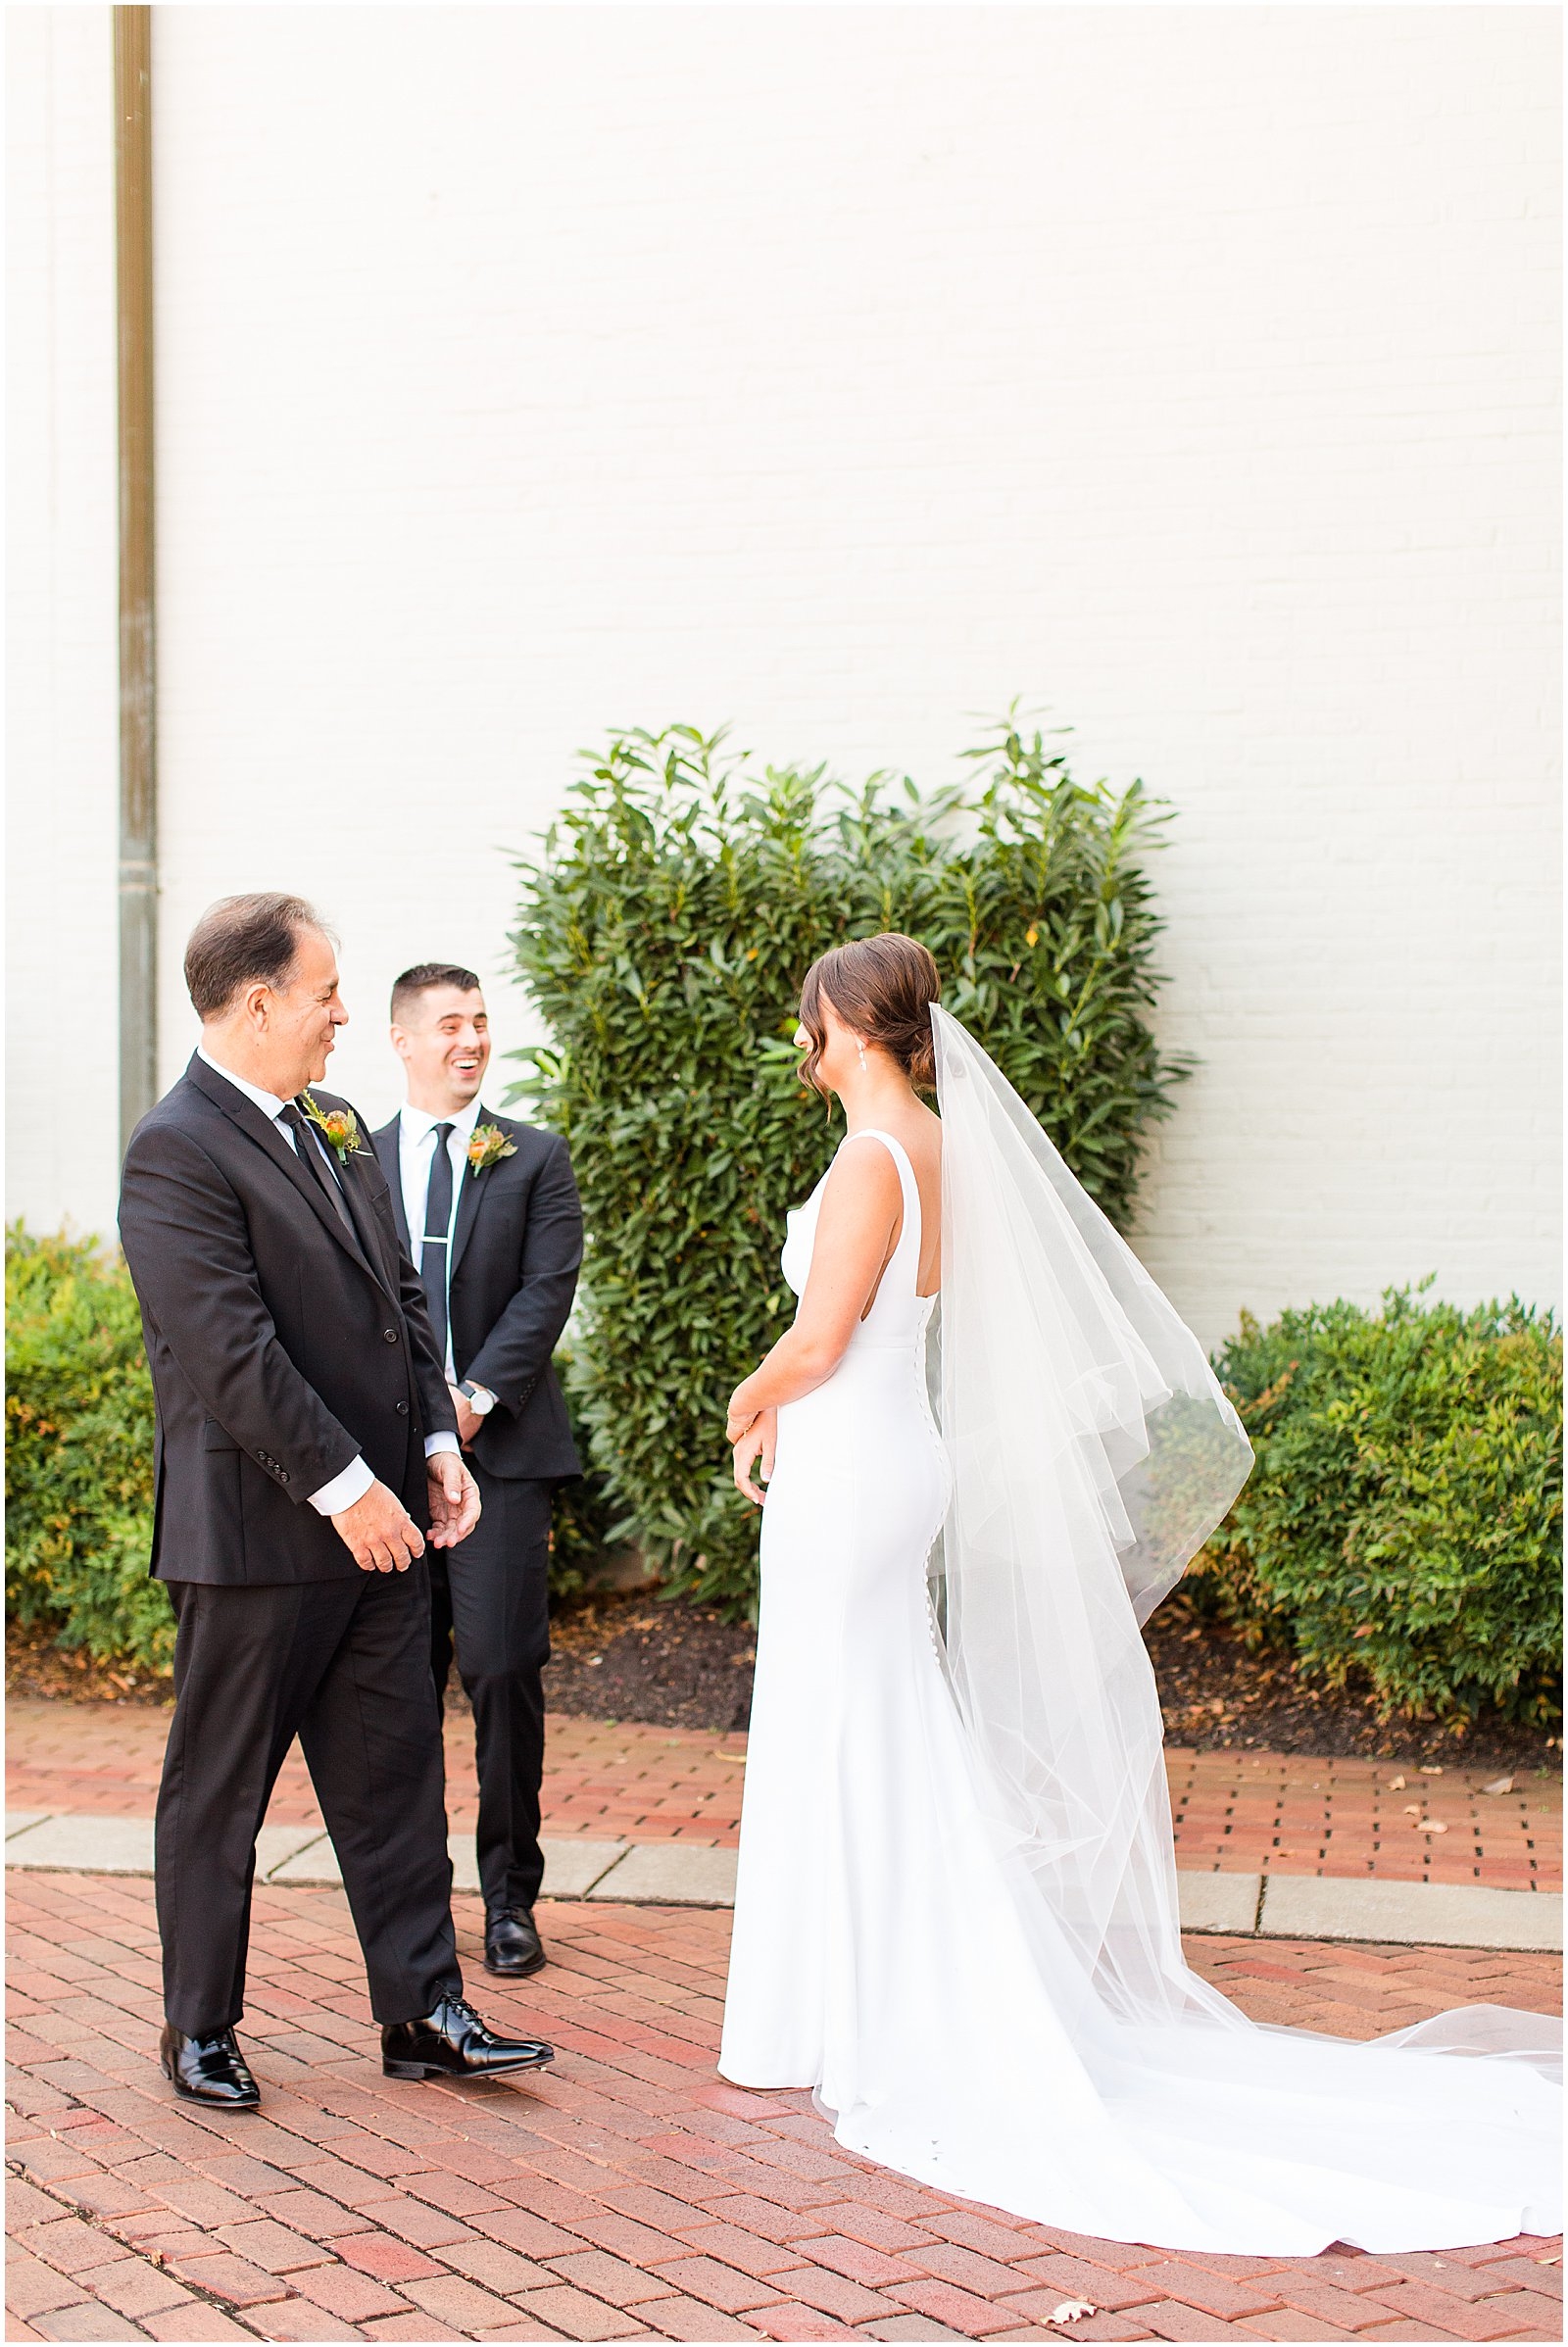 A Fall Wedding at Evansville Country Club | Kaley and Devon | Bret and Brandie Photography 0032.jpg